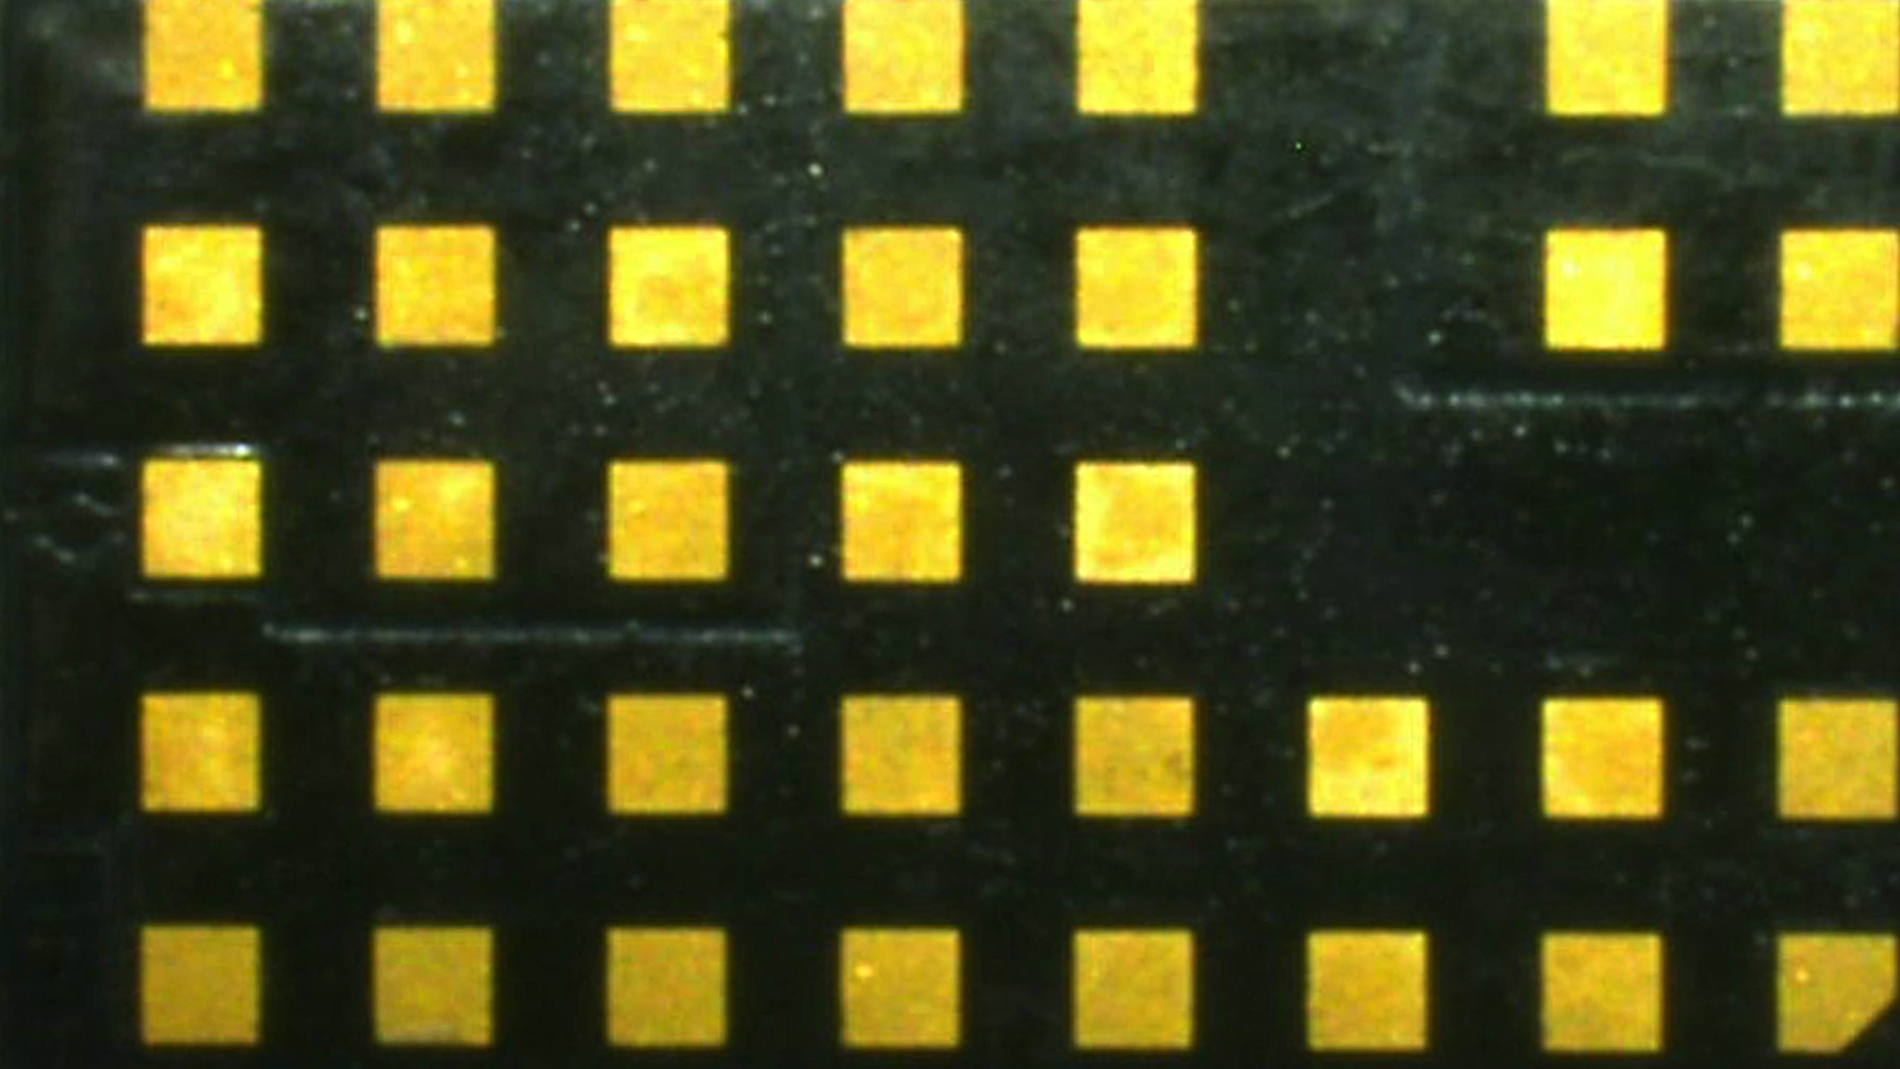 Solder side (bottom) of the LGA35 (all images: Rehm Thermal Systems GmbH)